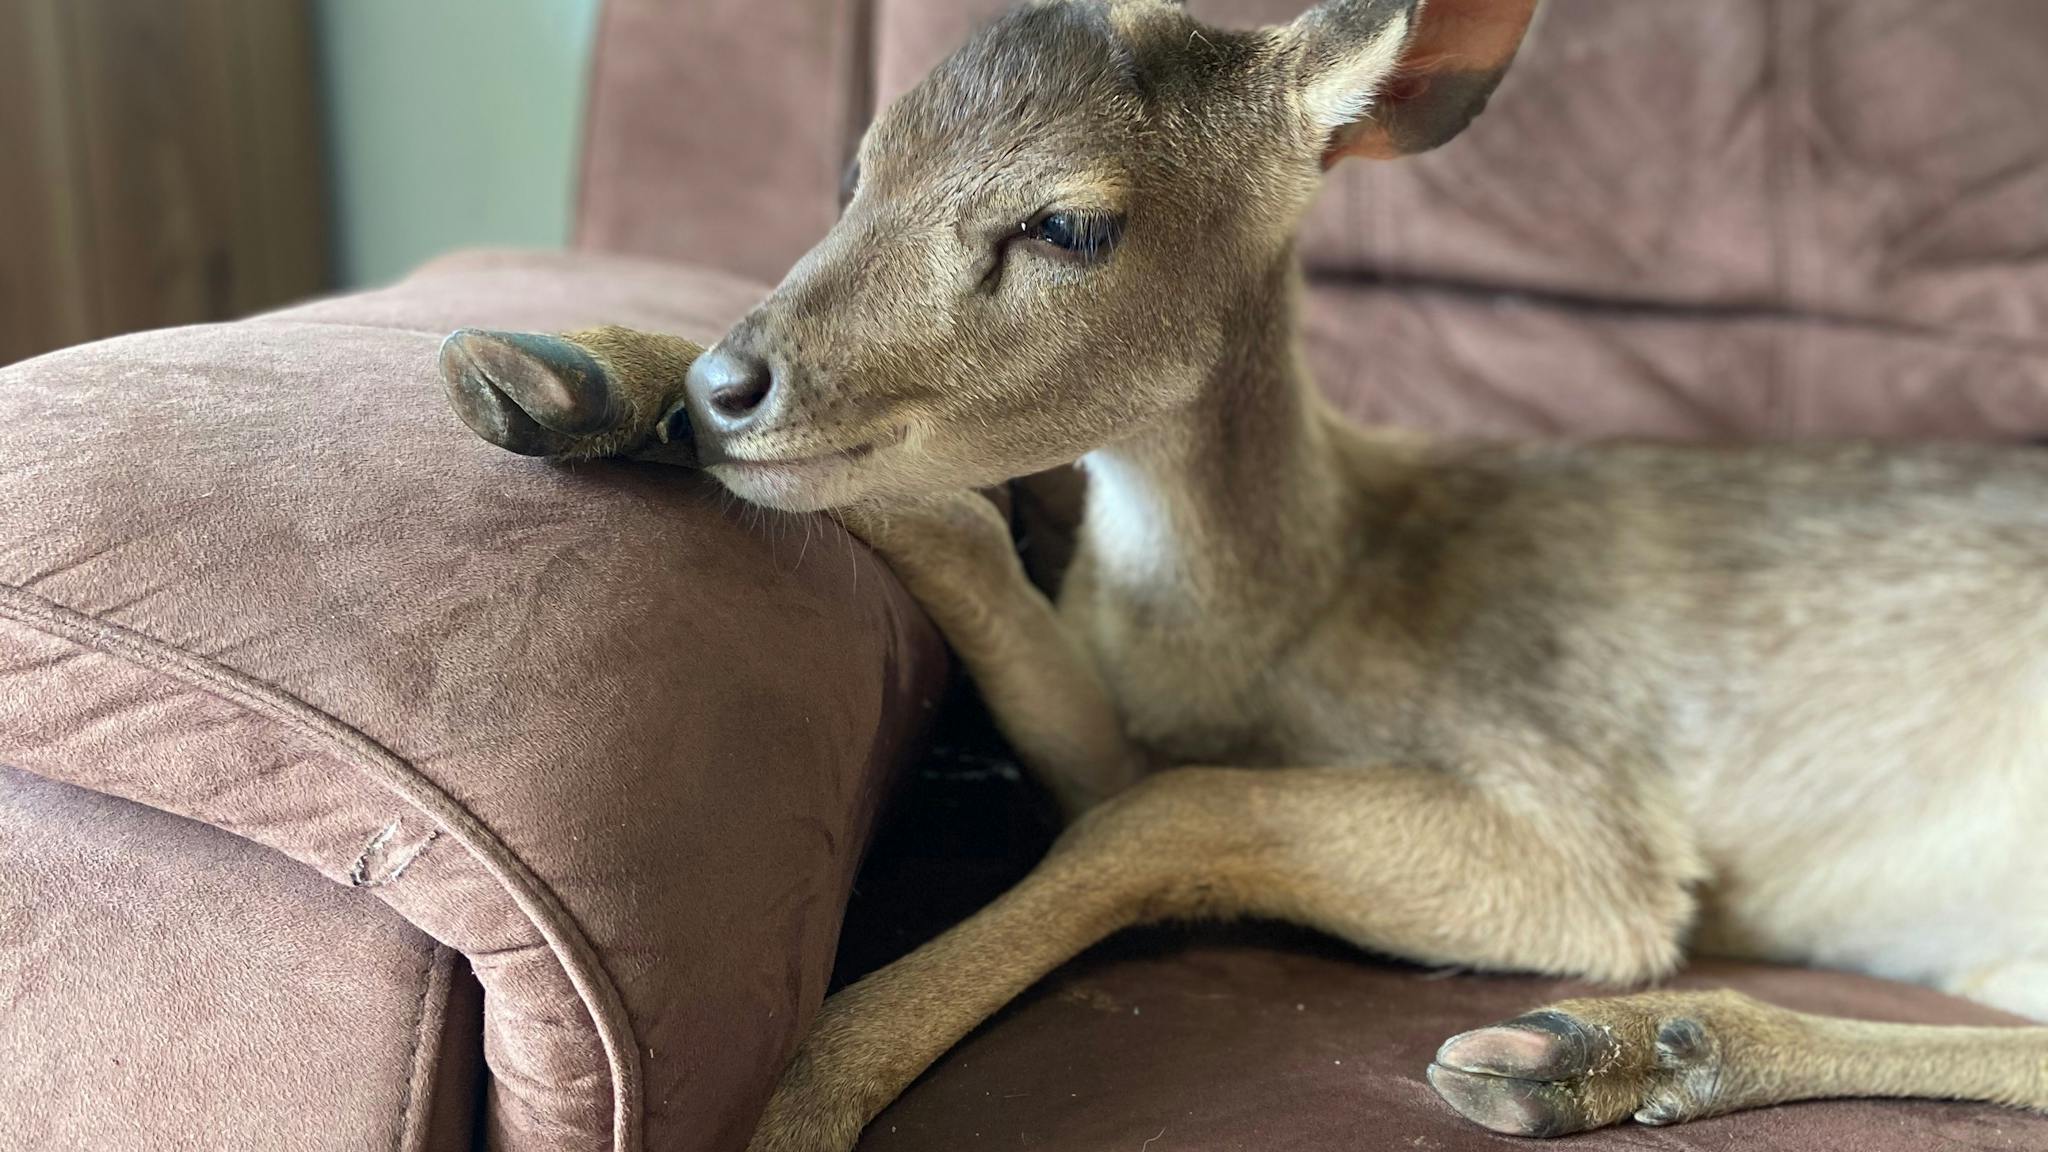 Deer relaxing on lounge chair